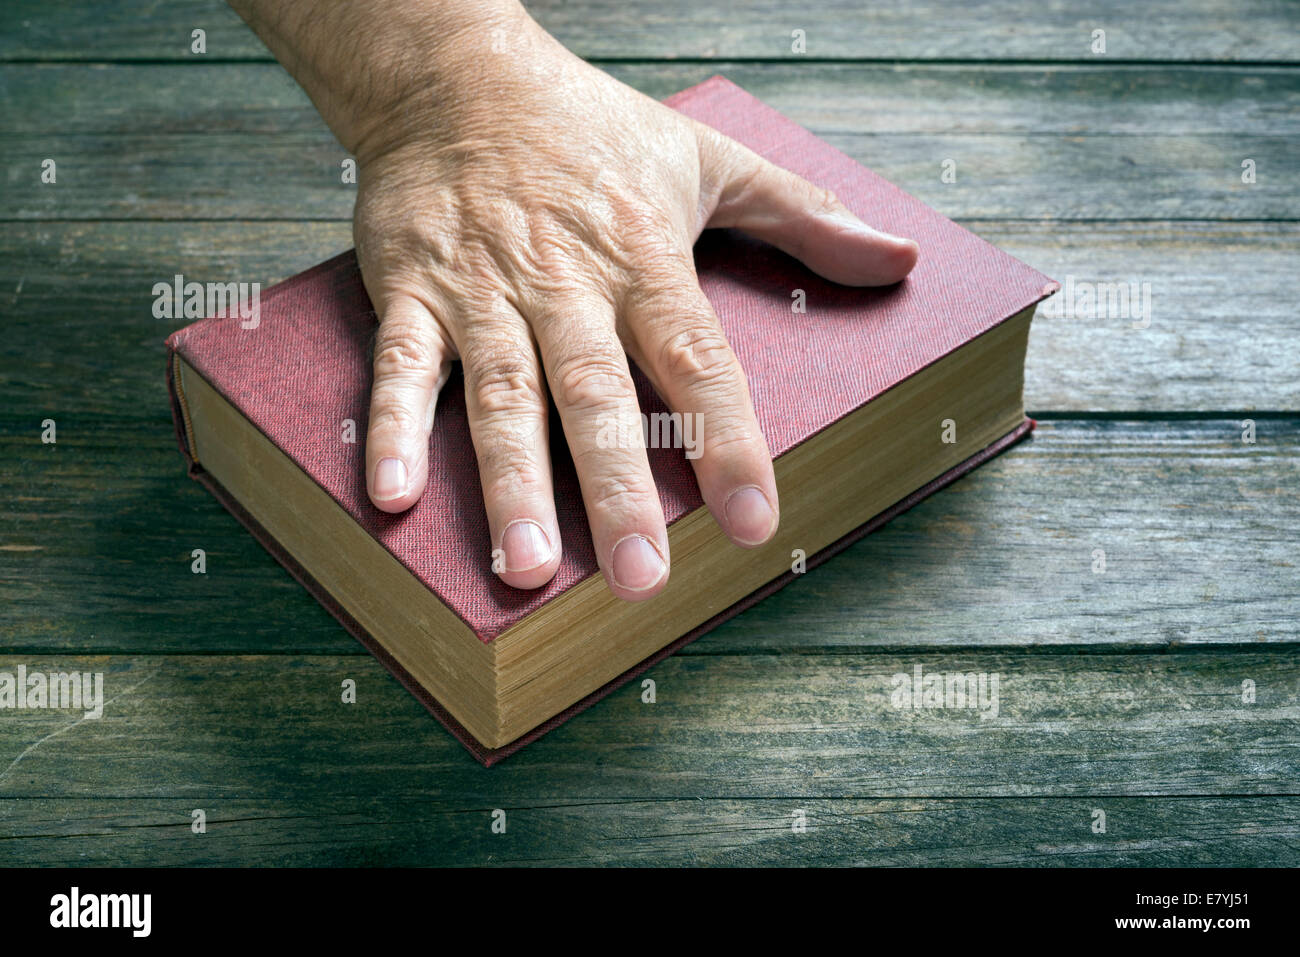 A man is resting his left hand on a red book at a table Stock Photo